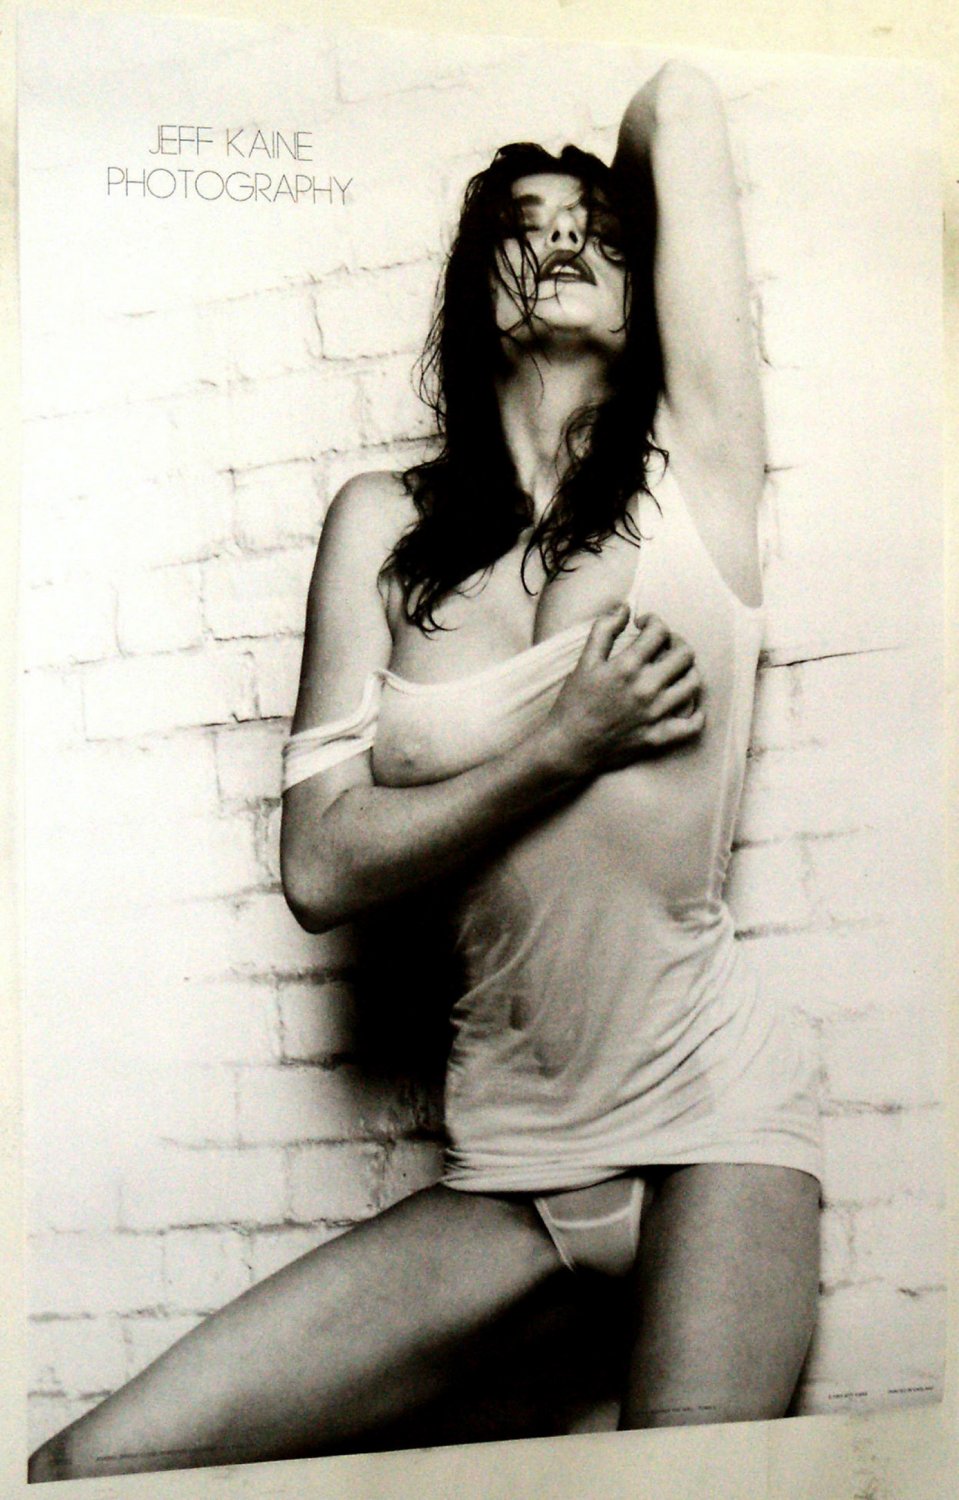 AGAINST THE WALL POSTER FROM 1993  FEMALE PIN UP MODEL